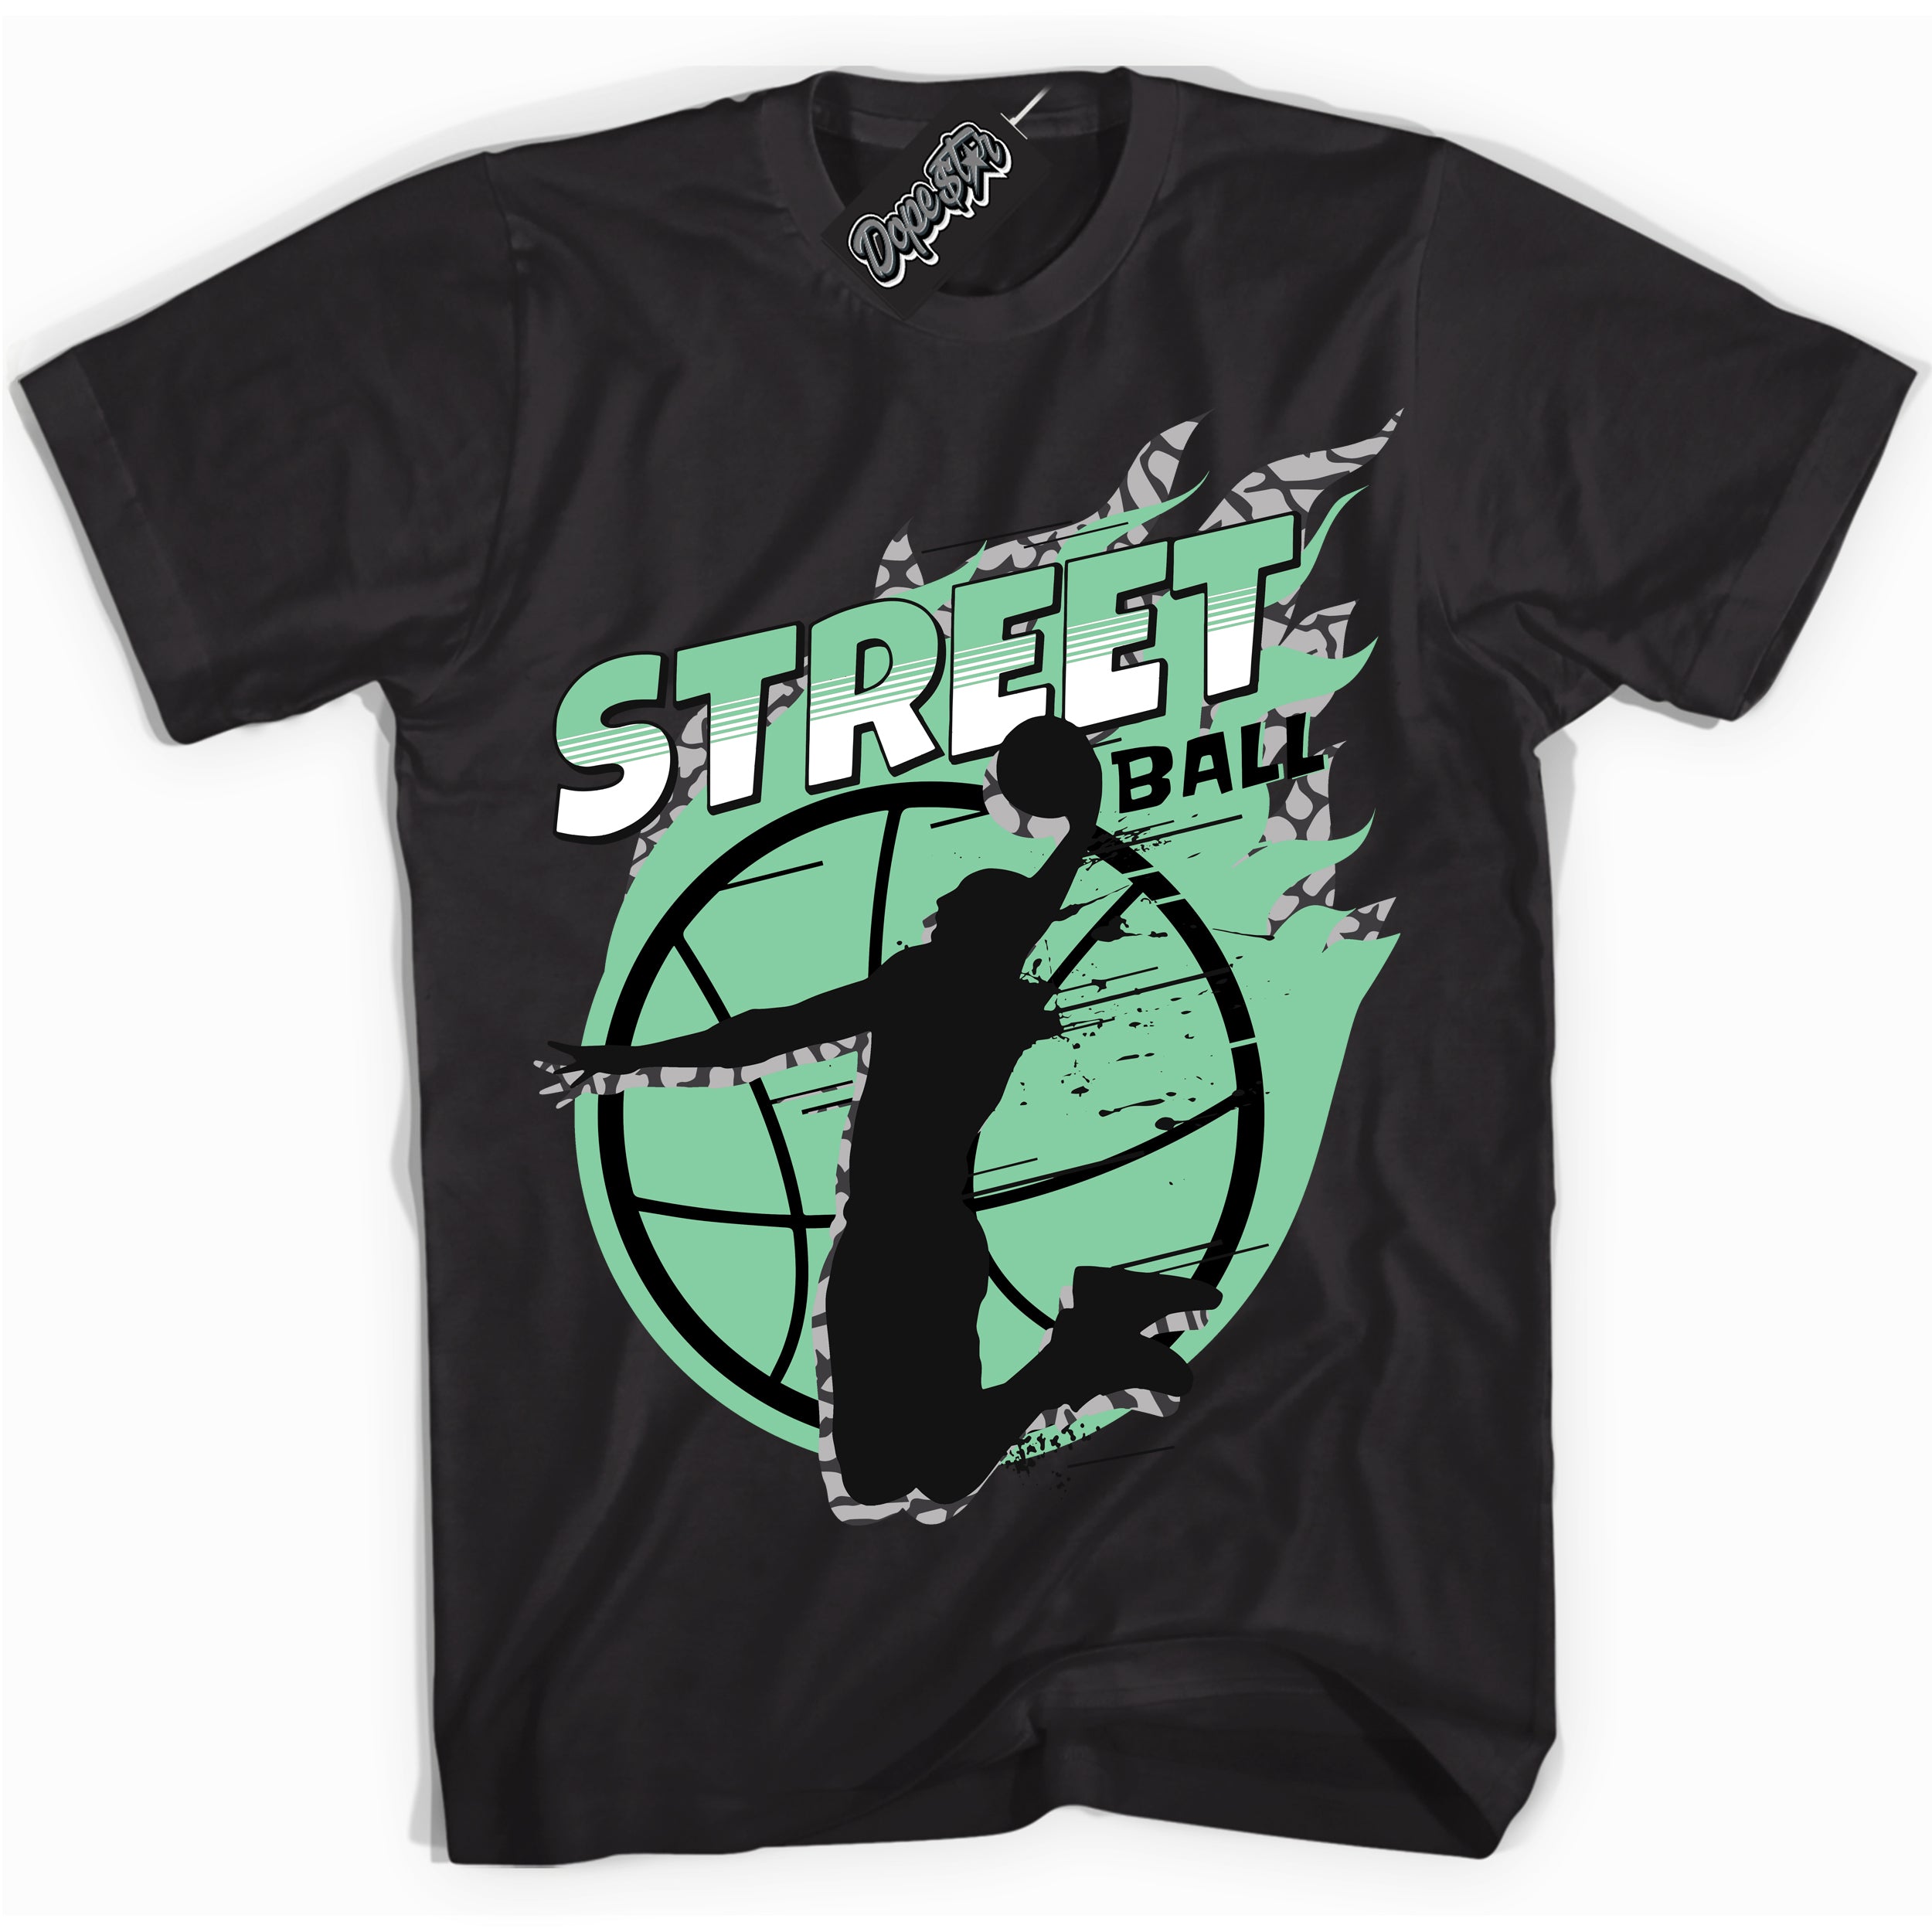 Cool Black graphic tee with “ Street Ball ” design, that perfectly matches Green Glow 3s sneakers 